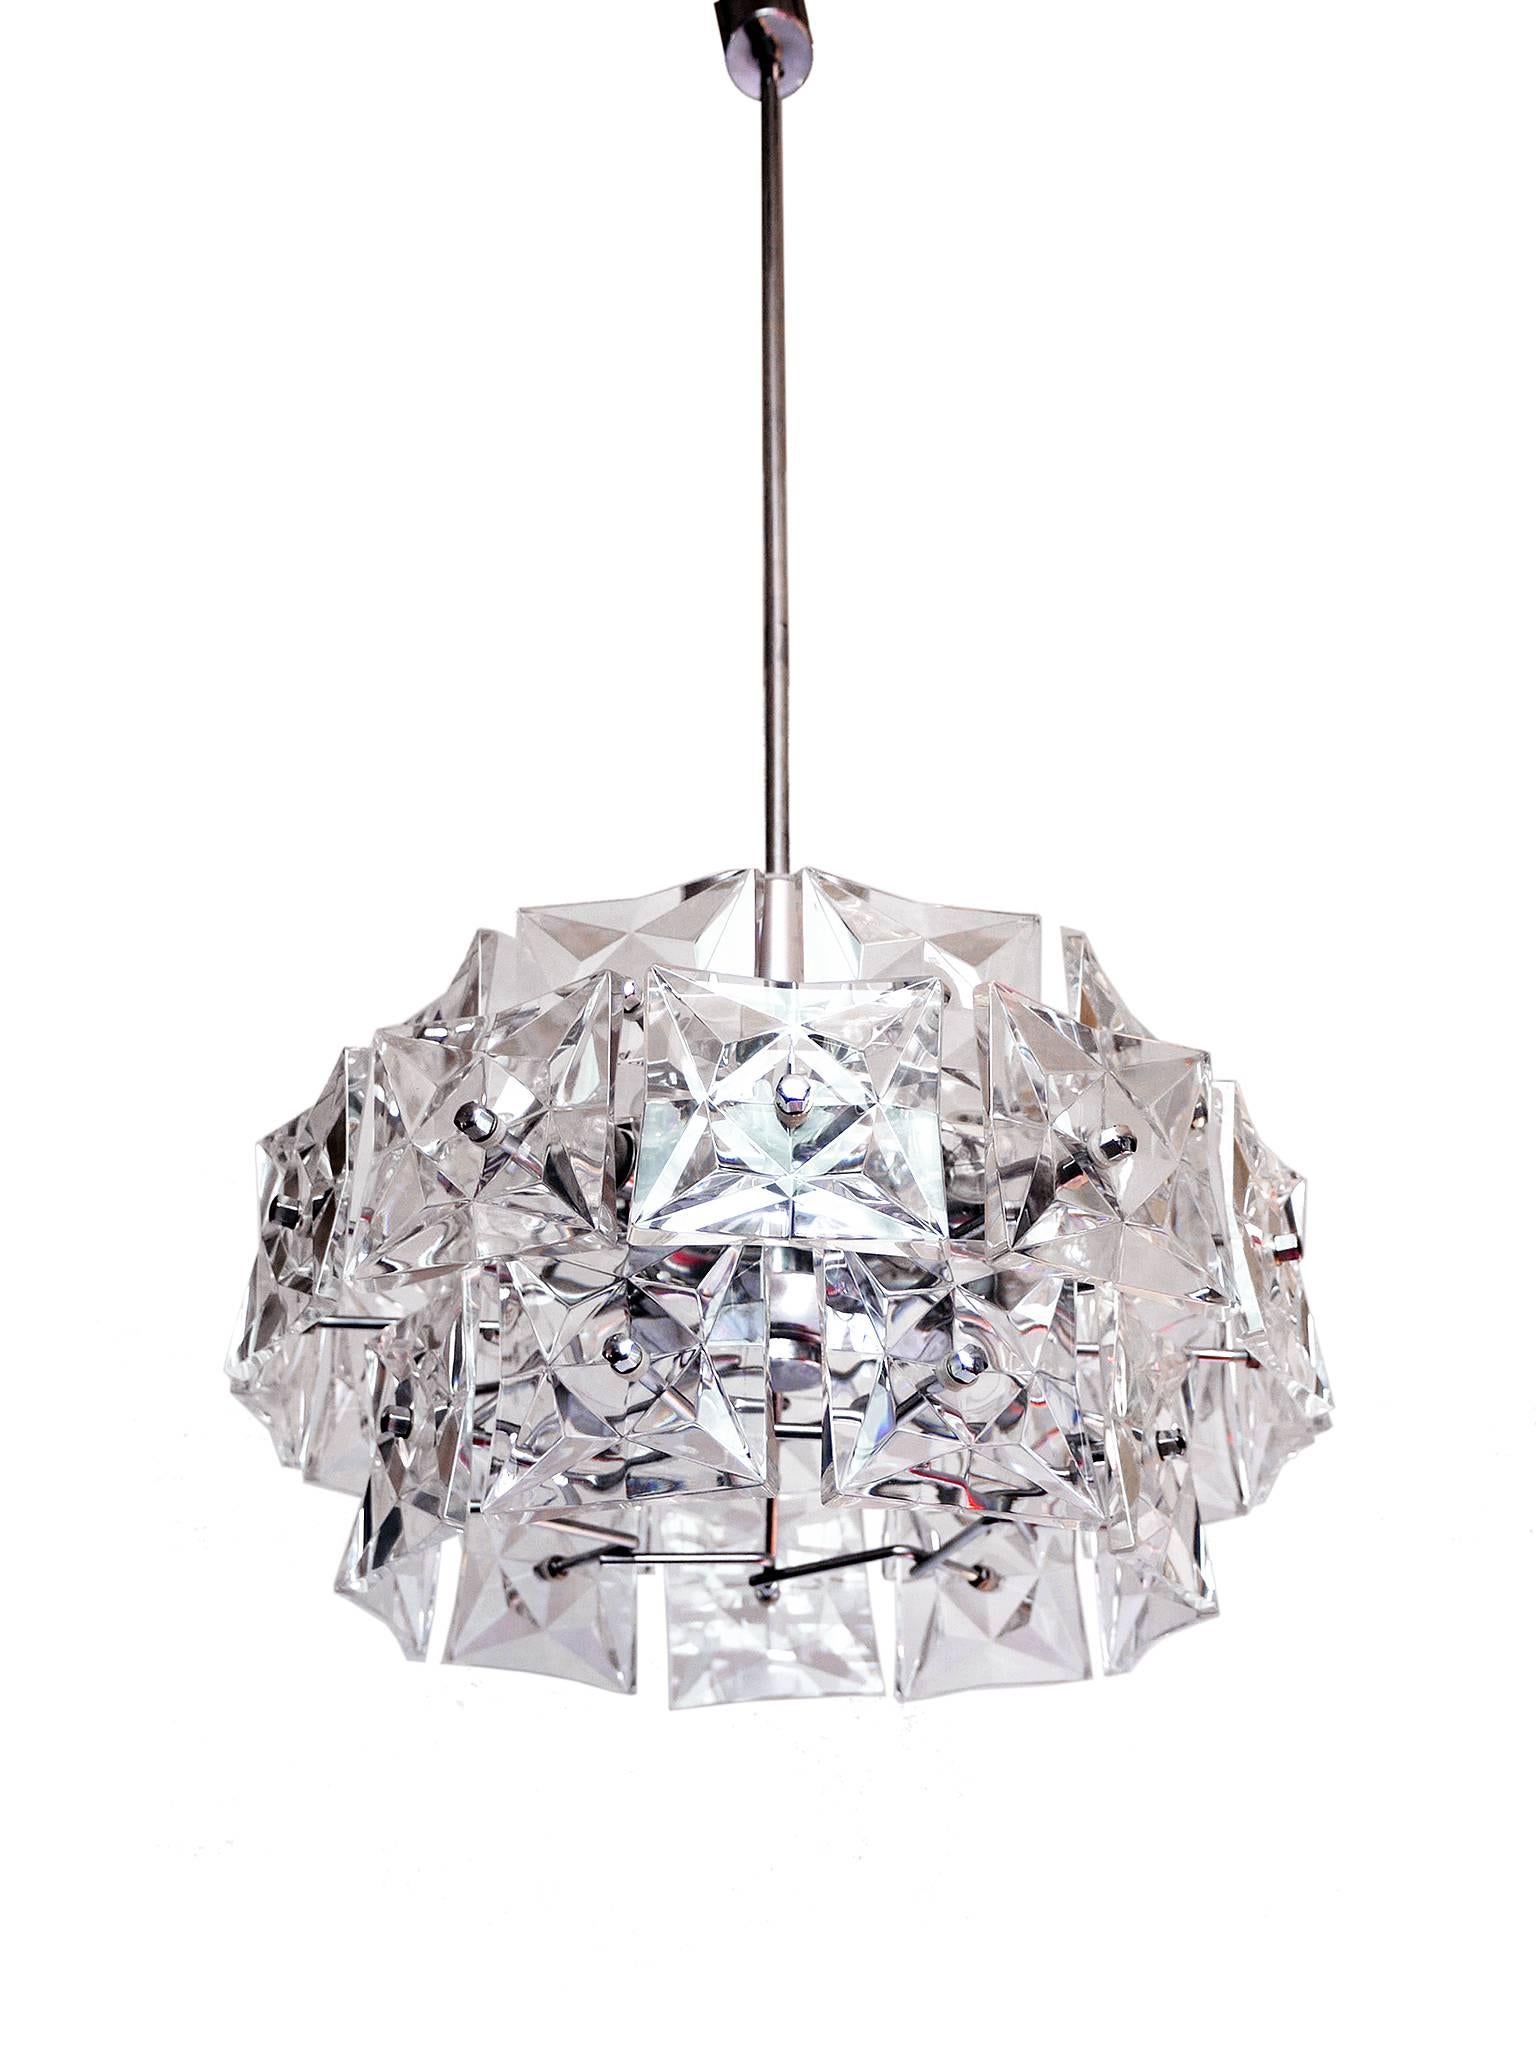 Three-tier chandelier with sculptural faceted crystals and chrome-plated frame made by Kinkeldey, Germany in the 1960s. 

Lighting: takes one big Edison E27 base bulb and twelve small Edison E14 base bulbs. 
The bar is divided and can be shortened